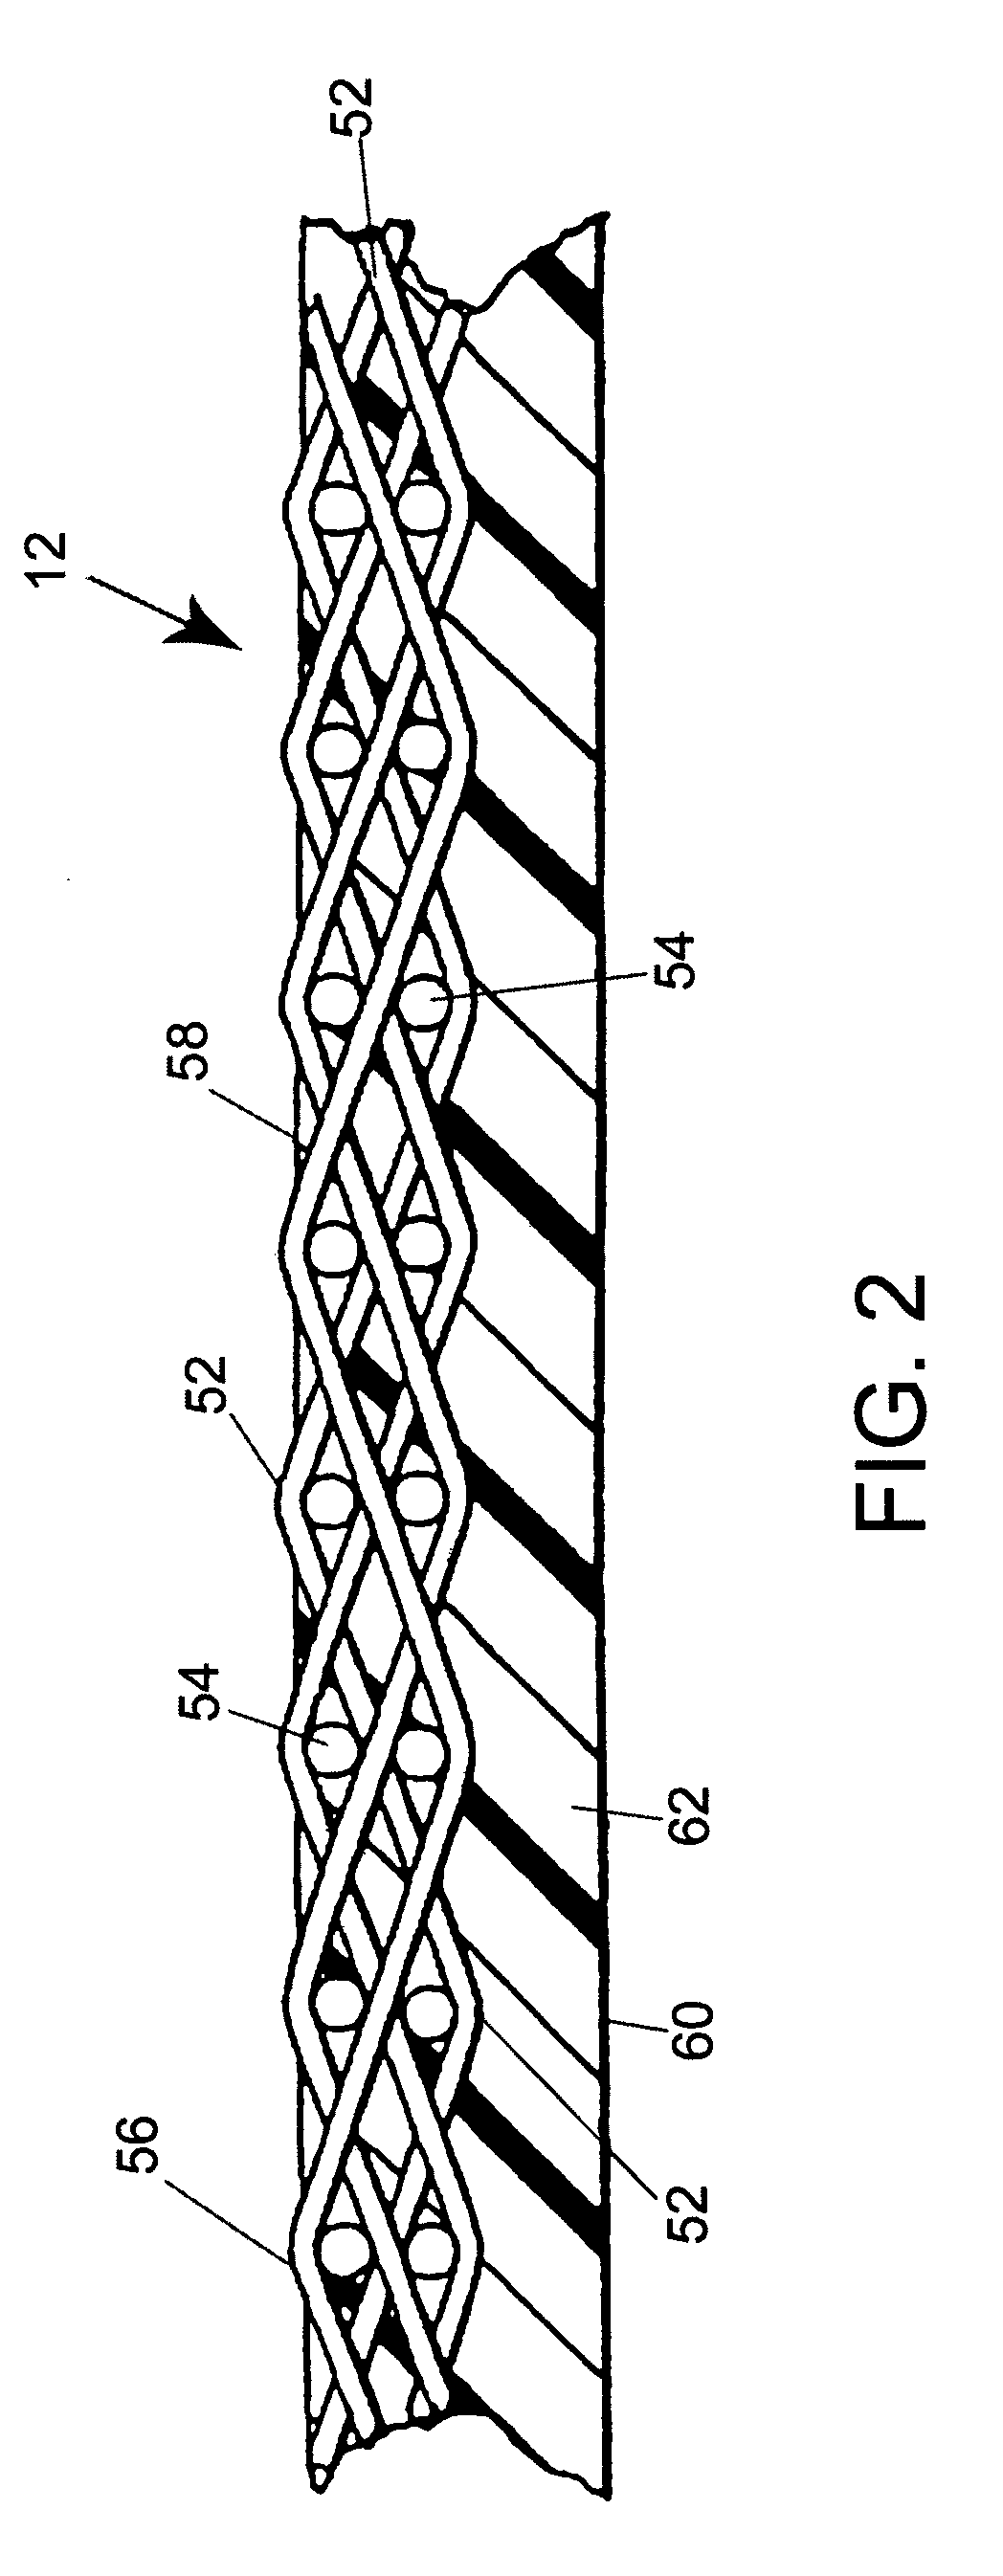 Method for manufacturing resin-impregnated endless belt and a belt for papermaking machines and similar industrial applications